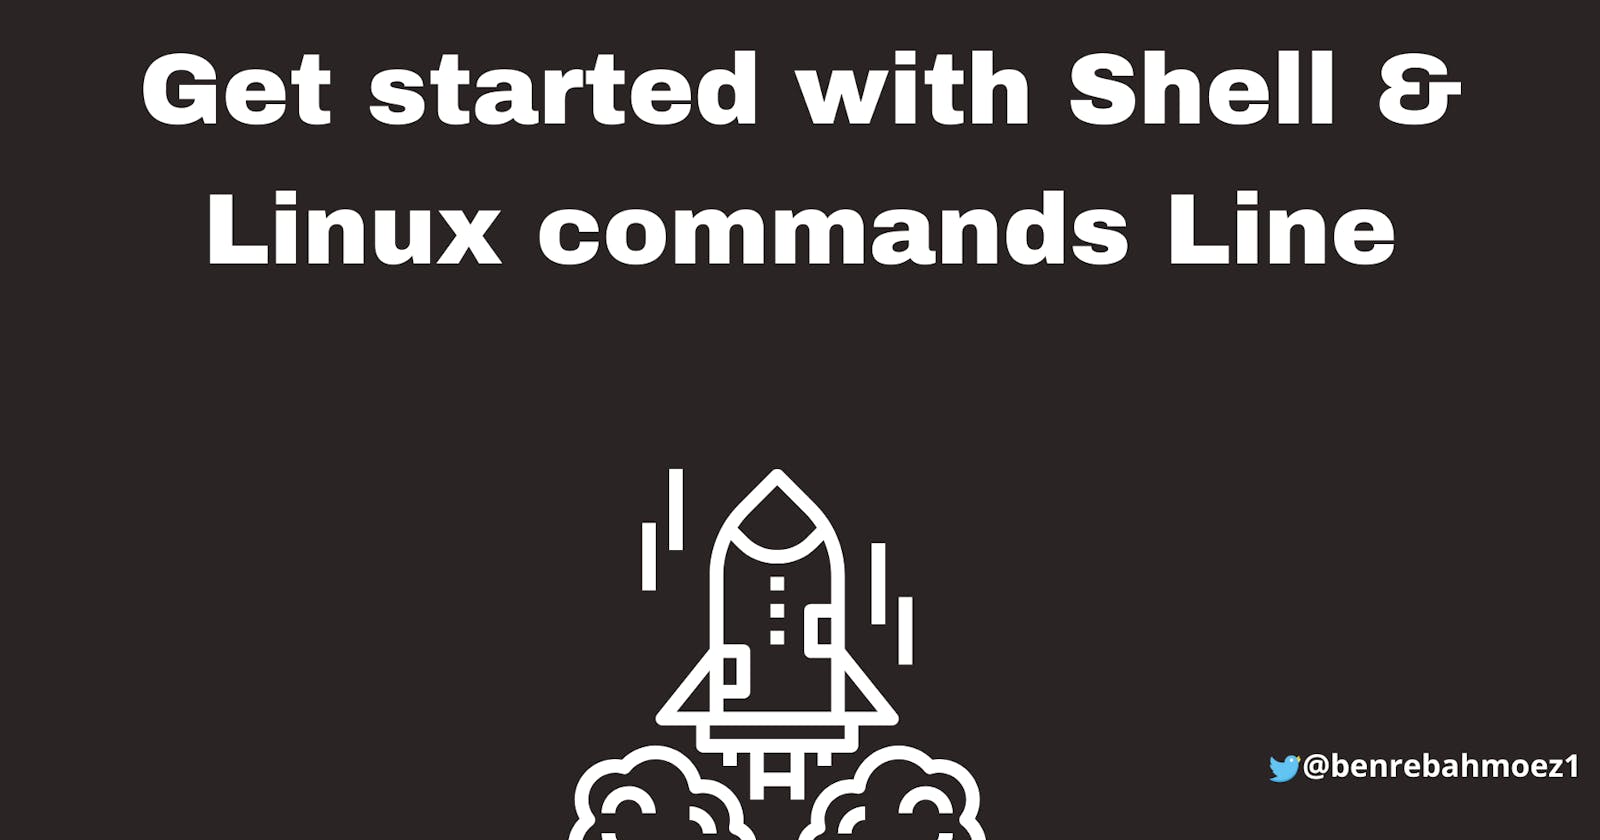 Get started with Shell & Linux commands Line